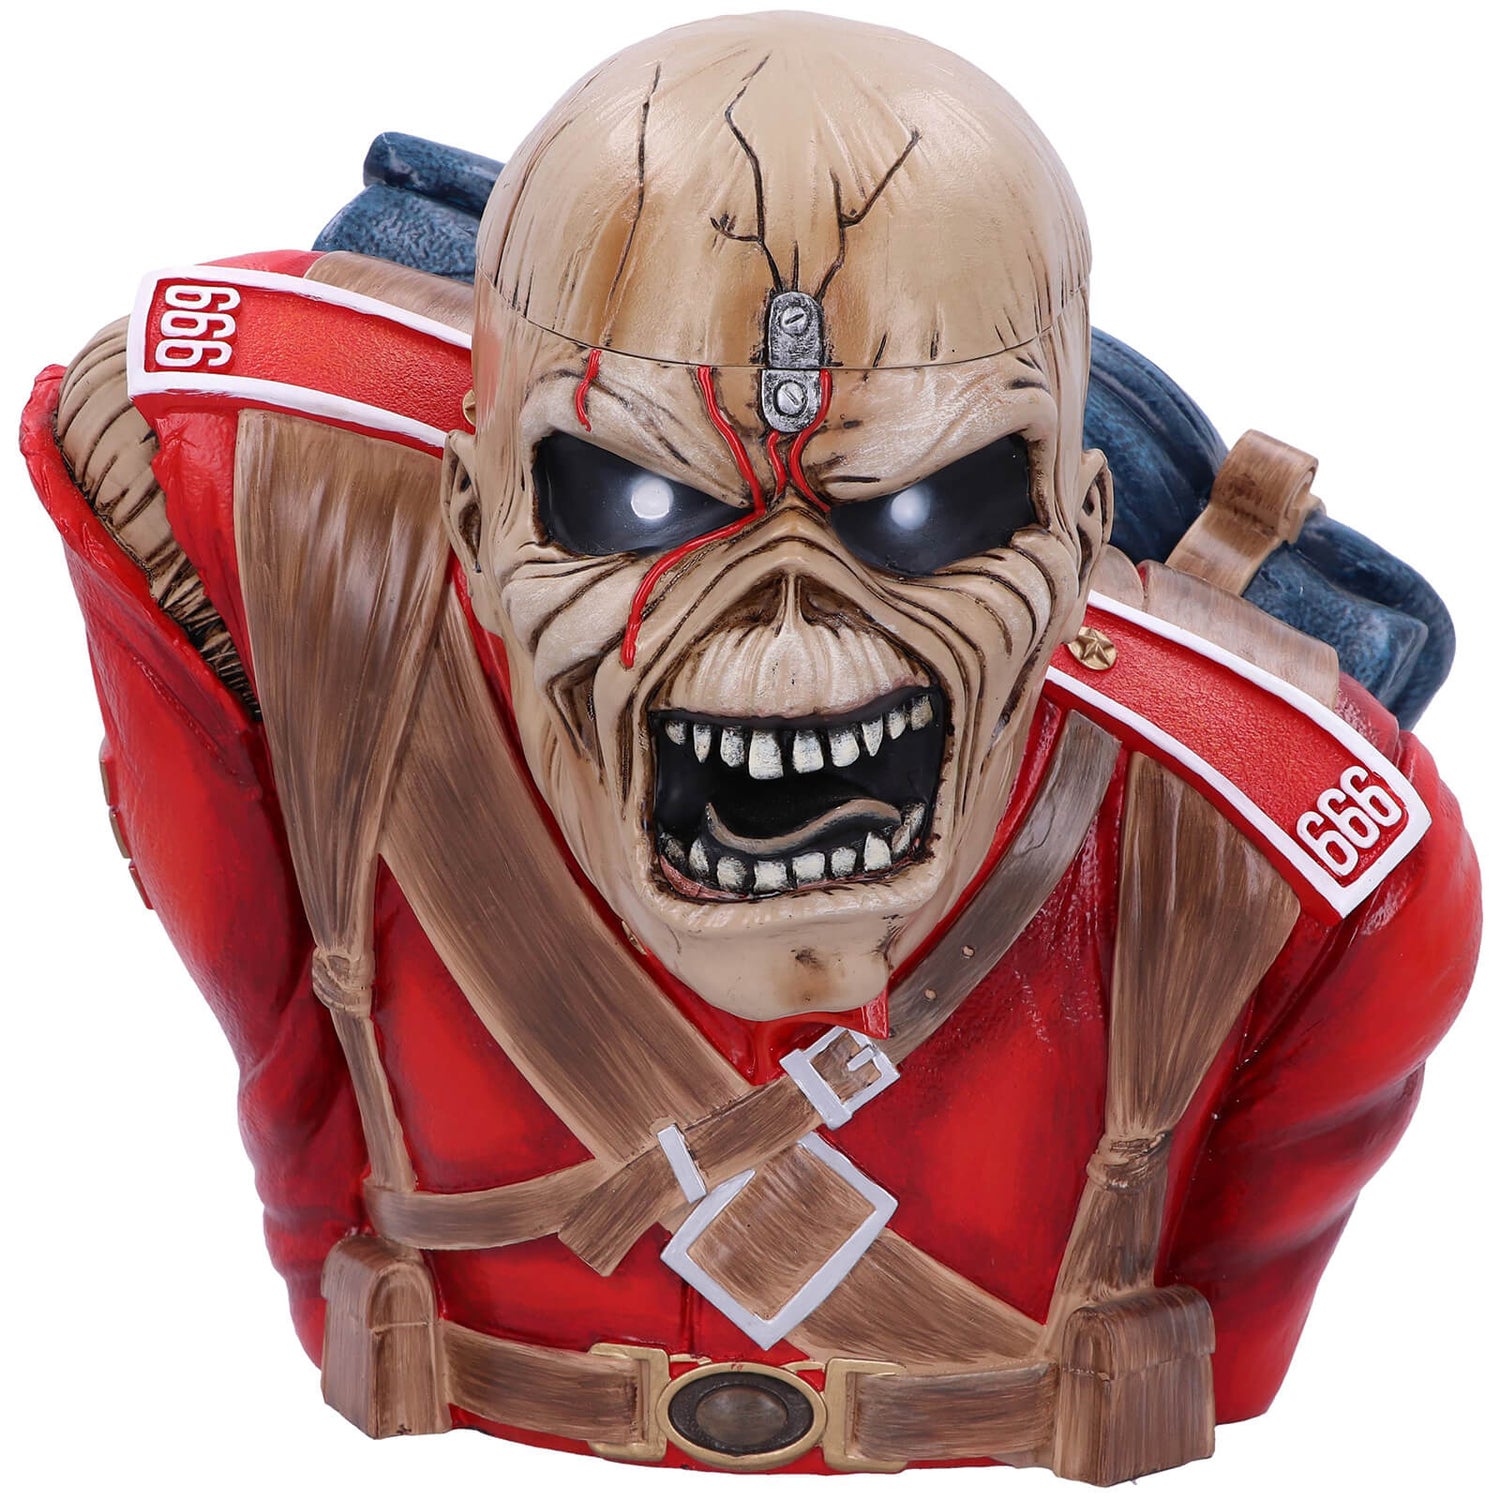 Iron Maiden The Trooper Collectible Bust Box 26.5cm